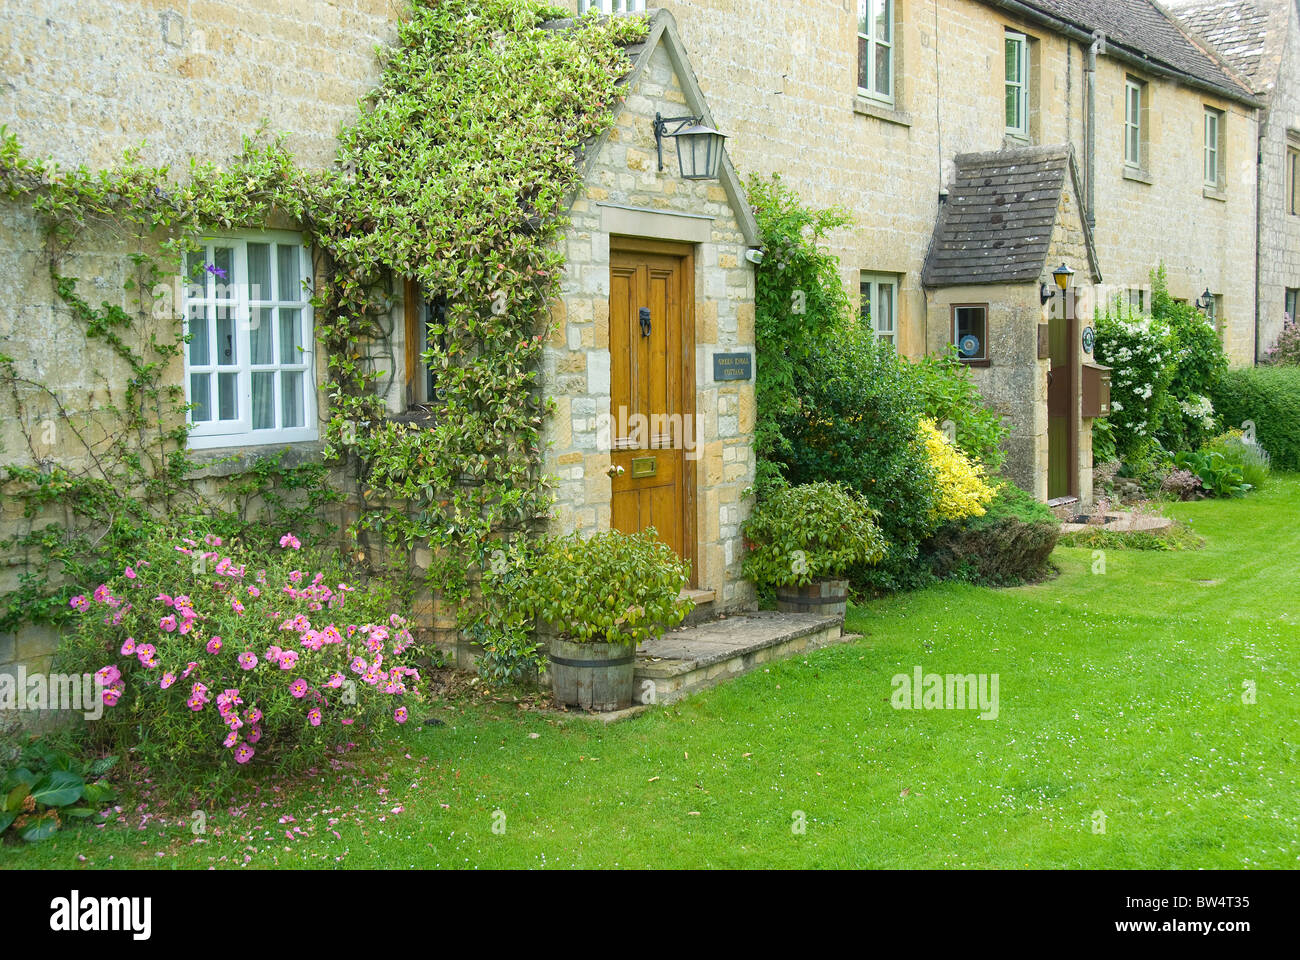 Row of houses, Broad Campden, Cotswolds, Gloucestershire, England, UK Stock Photo